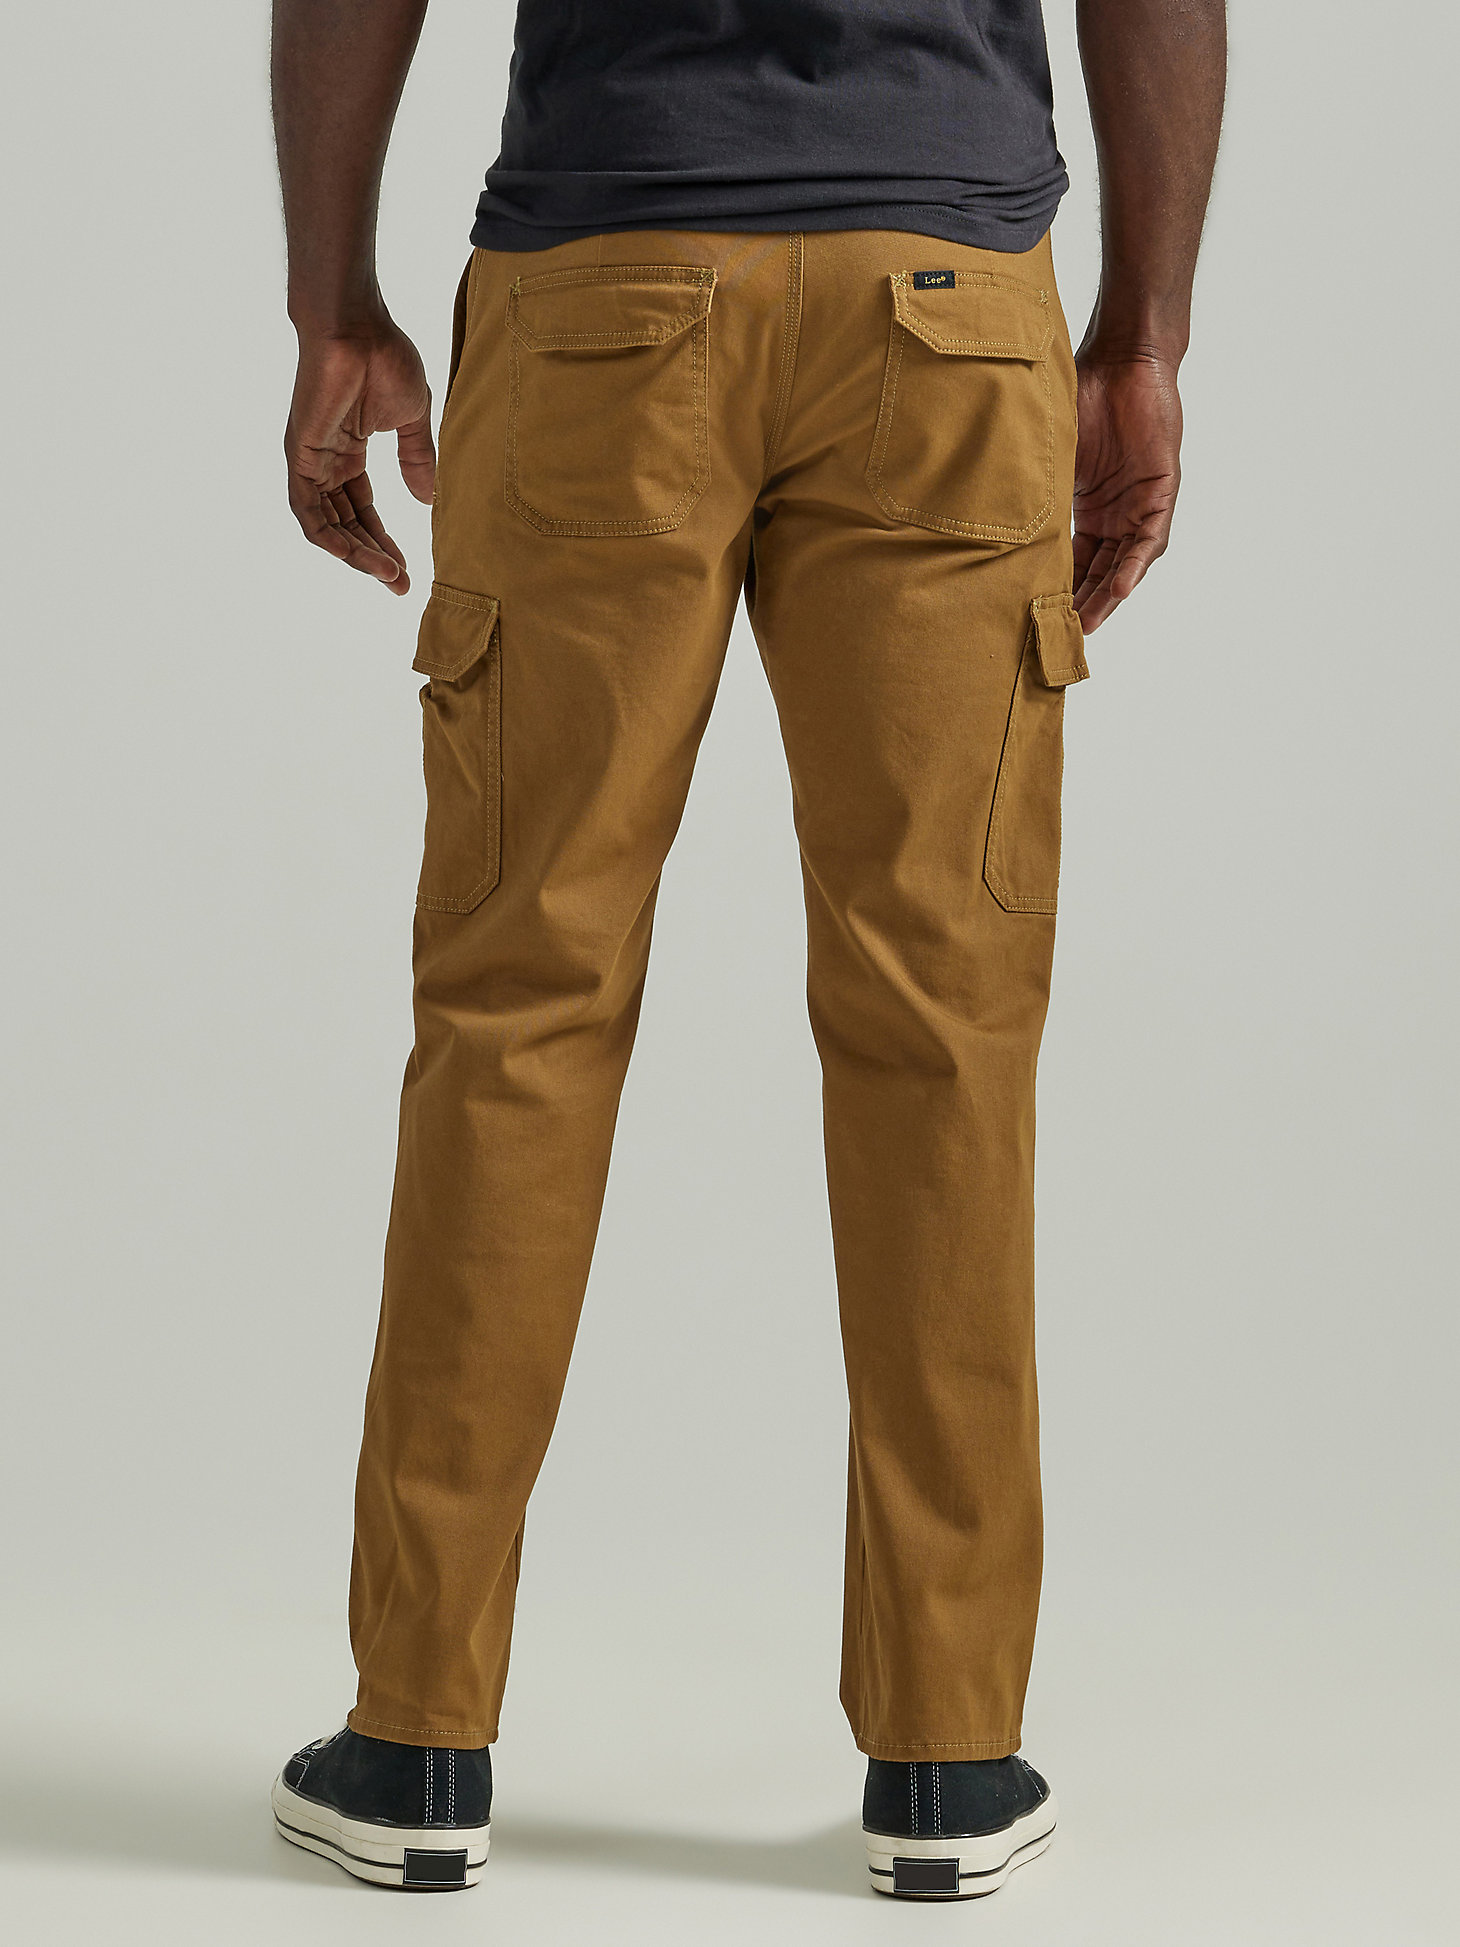 Men's Extreme Motion Cargo Twill Pant in Tumbleweed alternative view 2